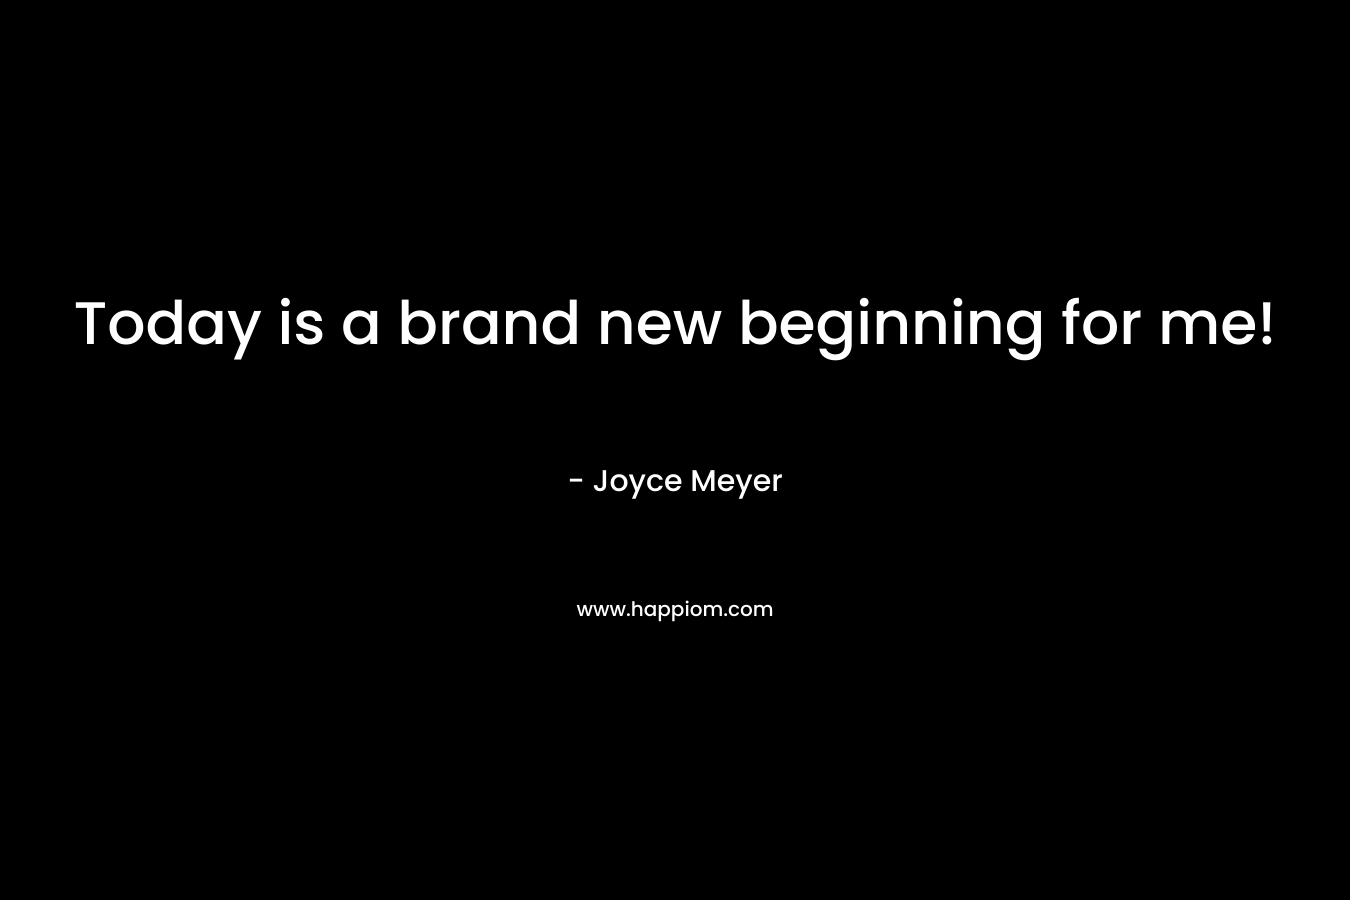 Today is a brand new beginning for me! – Joyce Meyer